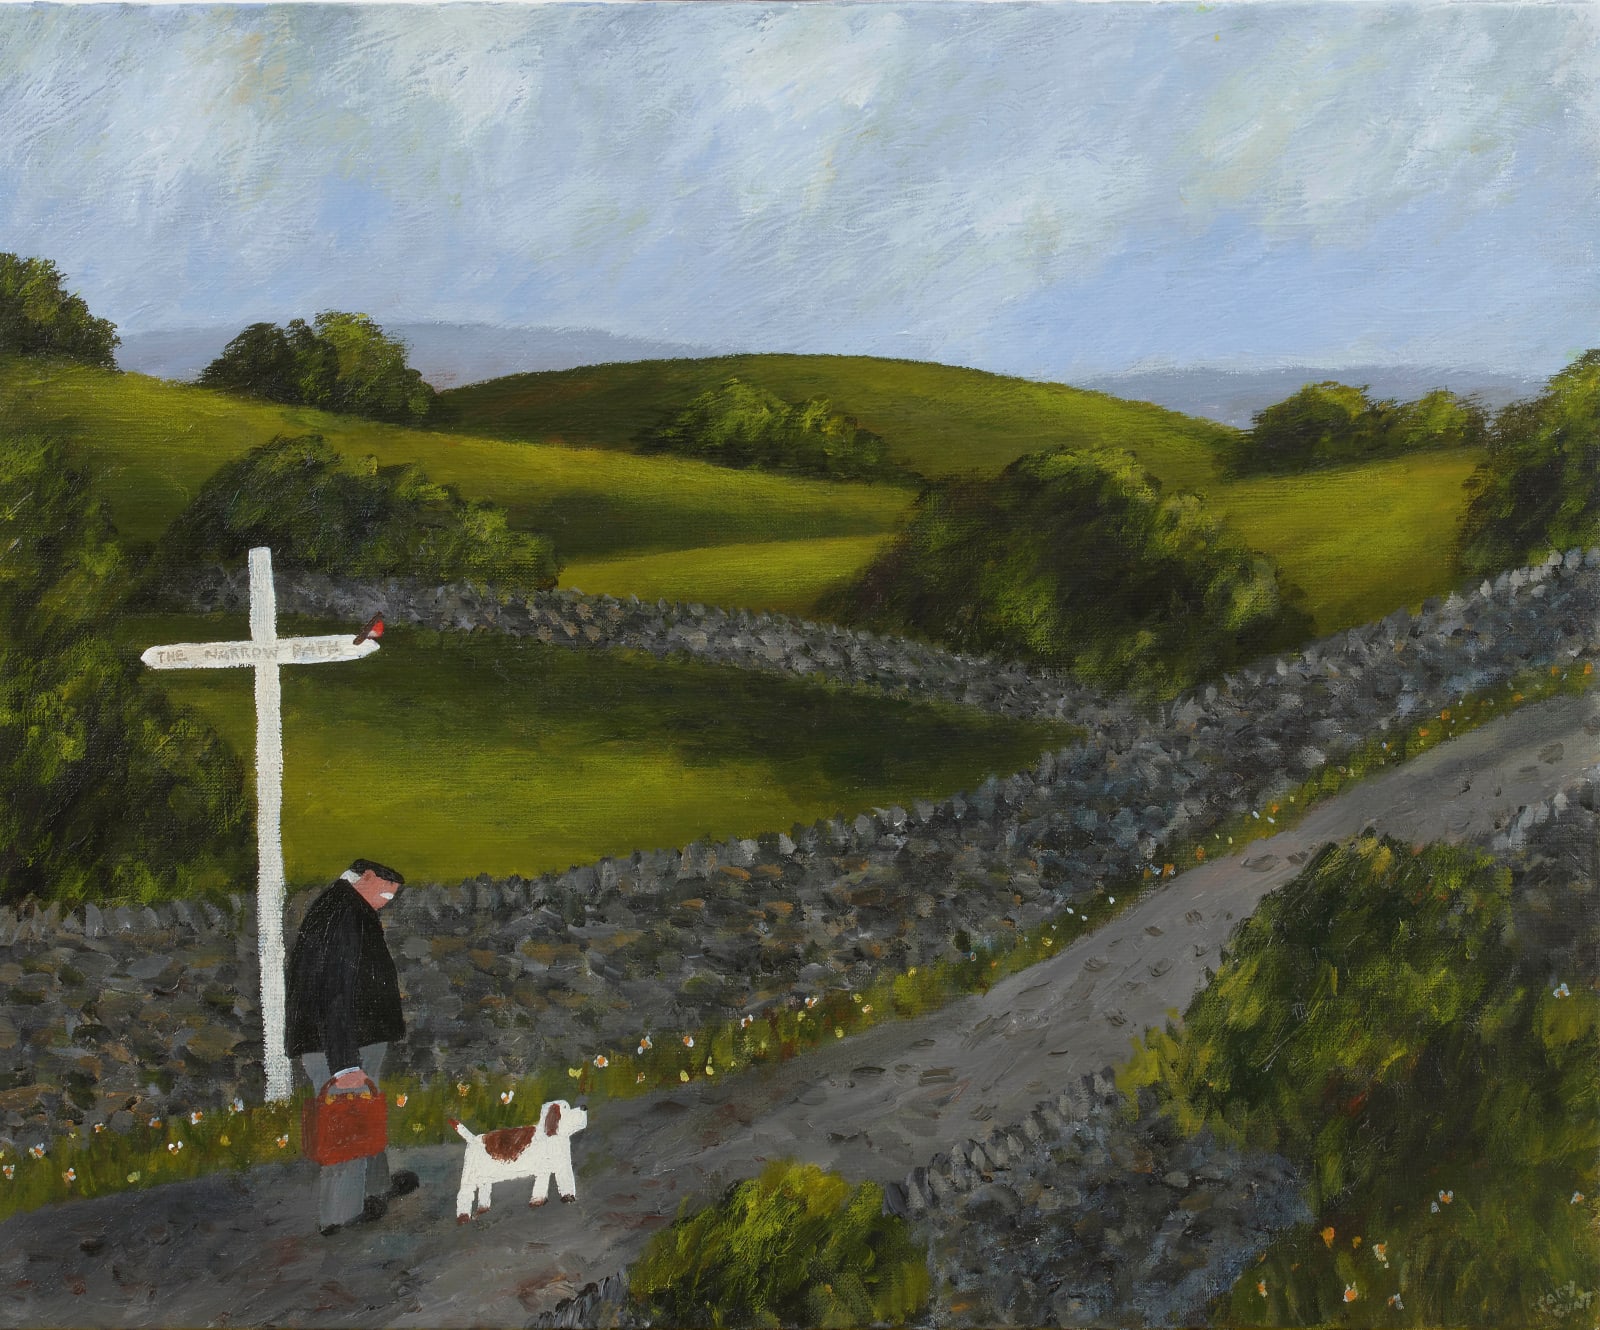 Gary Bunt, The Dales